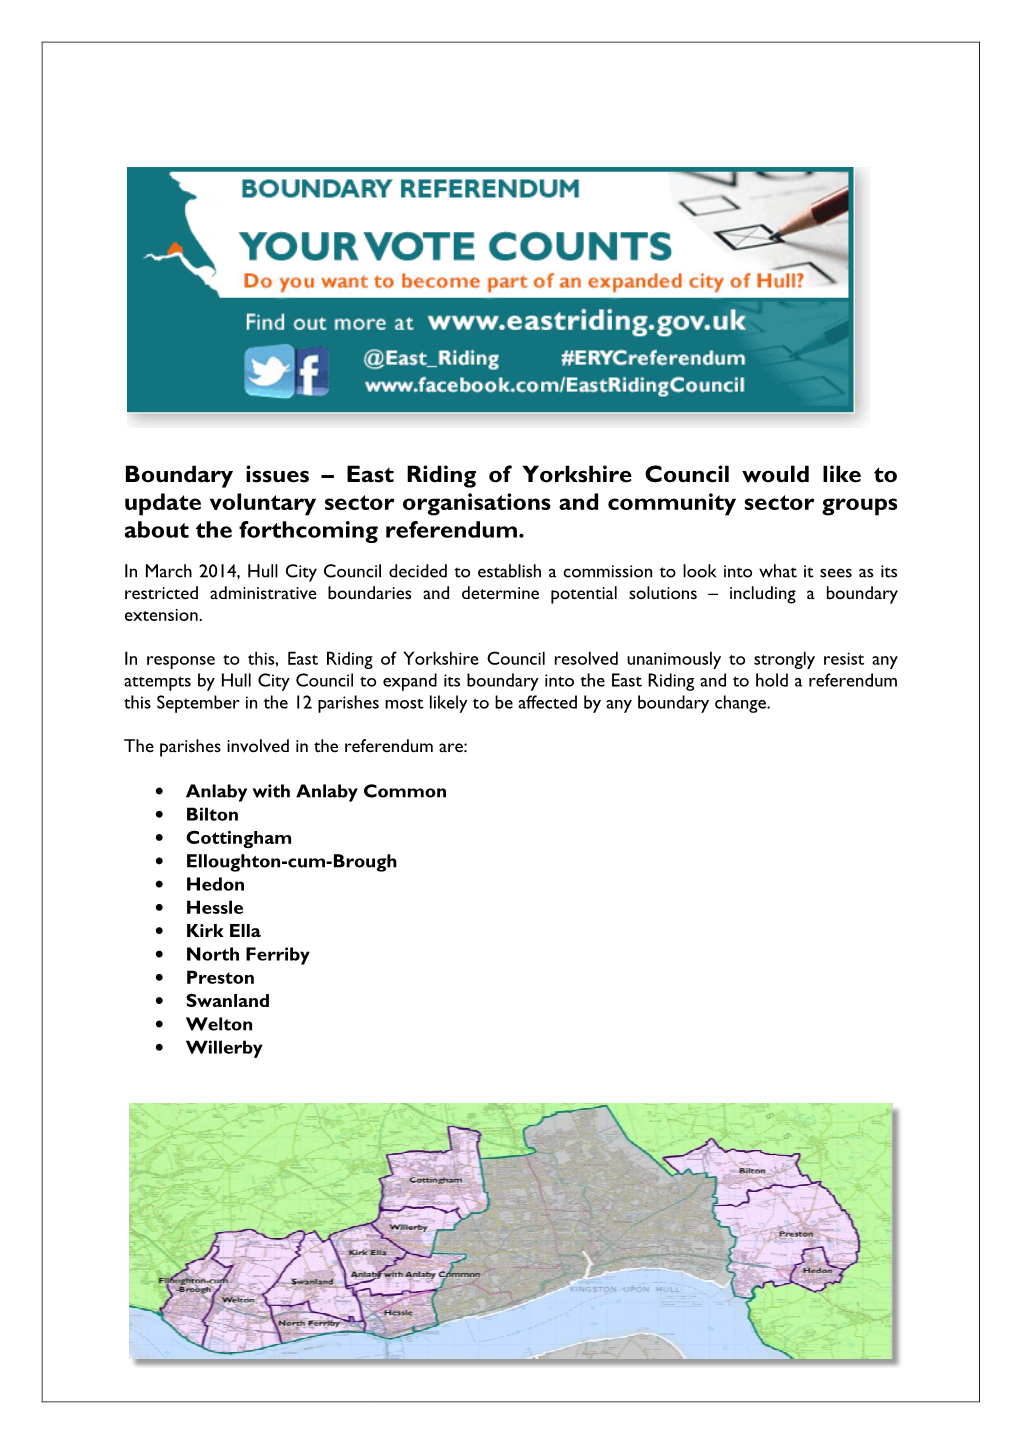 Boundary Issues – East Riding of Yorkshire Council Would Like to Update Voluntary Sector Organisations and Community Sector Groups About the Forthcoming Referendum